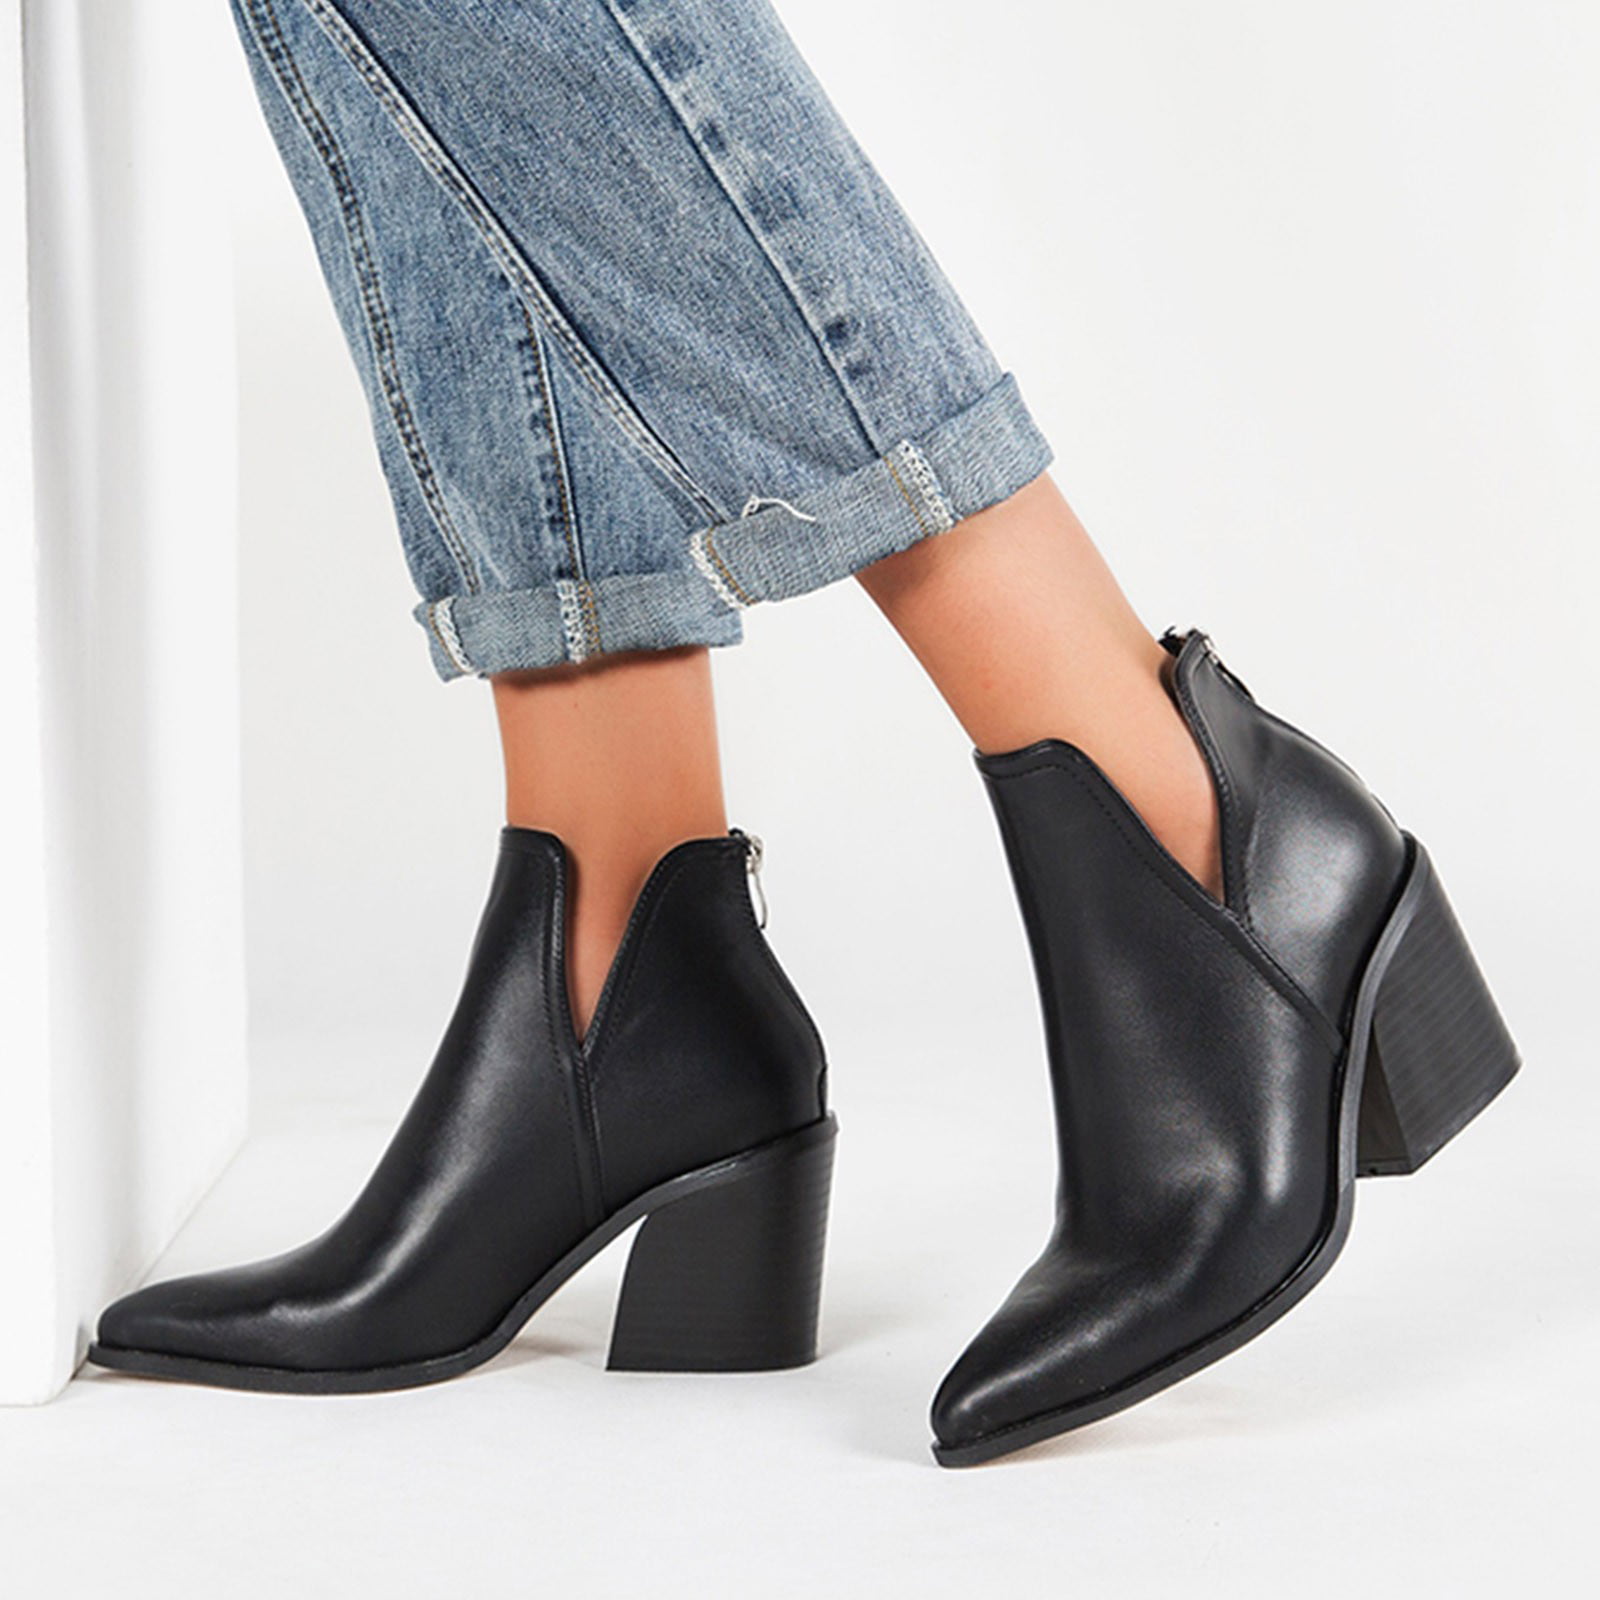 Shoes Booties Cut Out Booties Bronx Cut Out Booties black elegant 